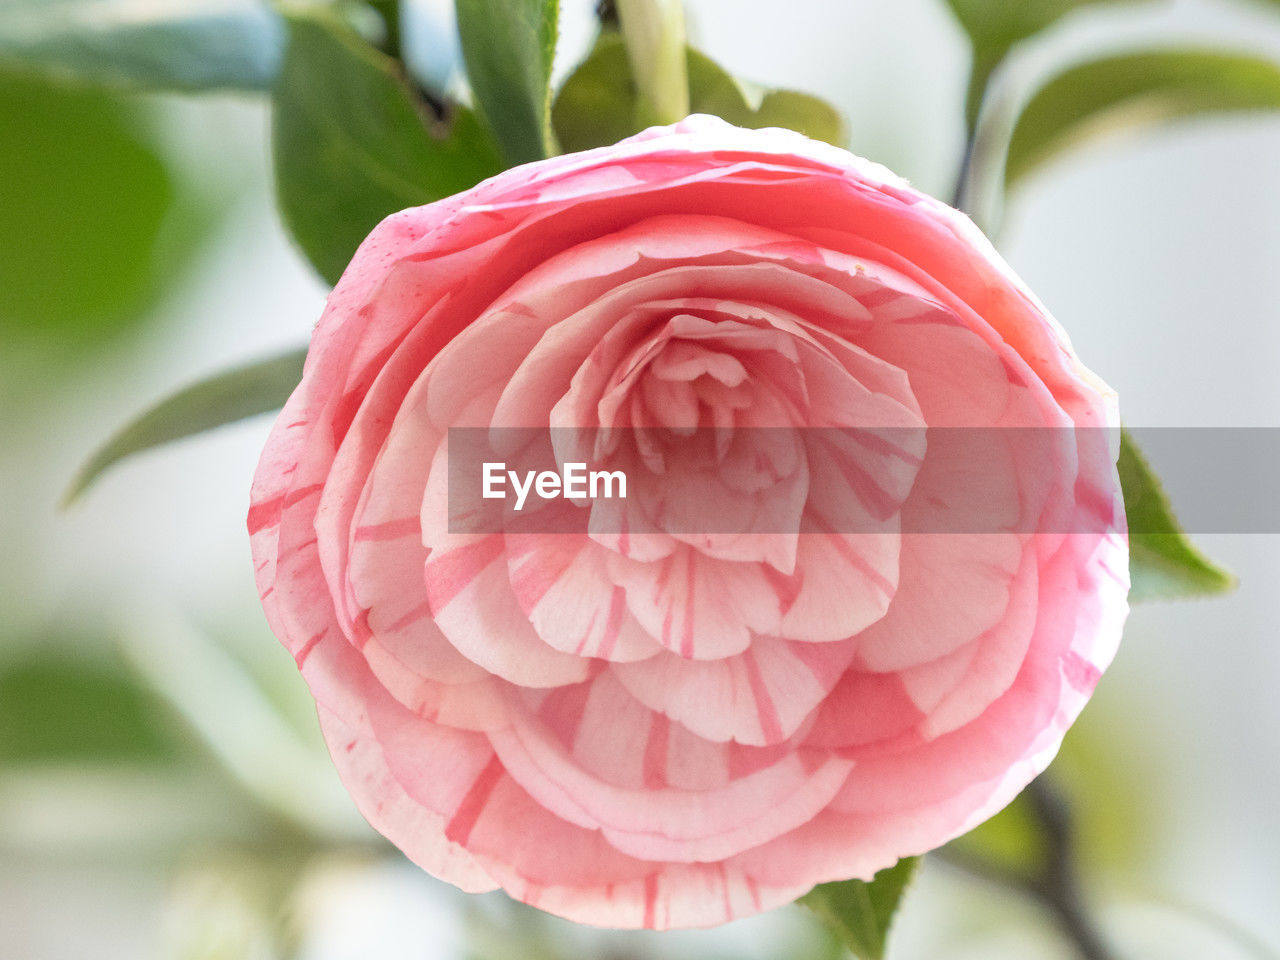 flower, pink, plant, flowering plant, beauty in nature, close-up, freshness, petal, nature, rose, flower head, fragility, inflorescence, no people, leaf, plant part, japanese camellia, focus on foreground, growth, outdoors, garden roses, springtime, day